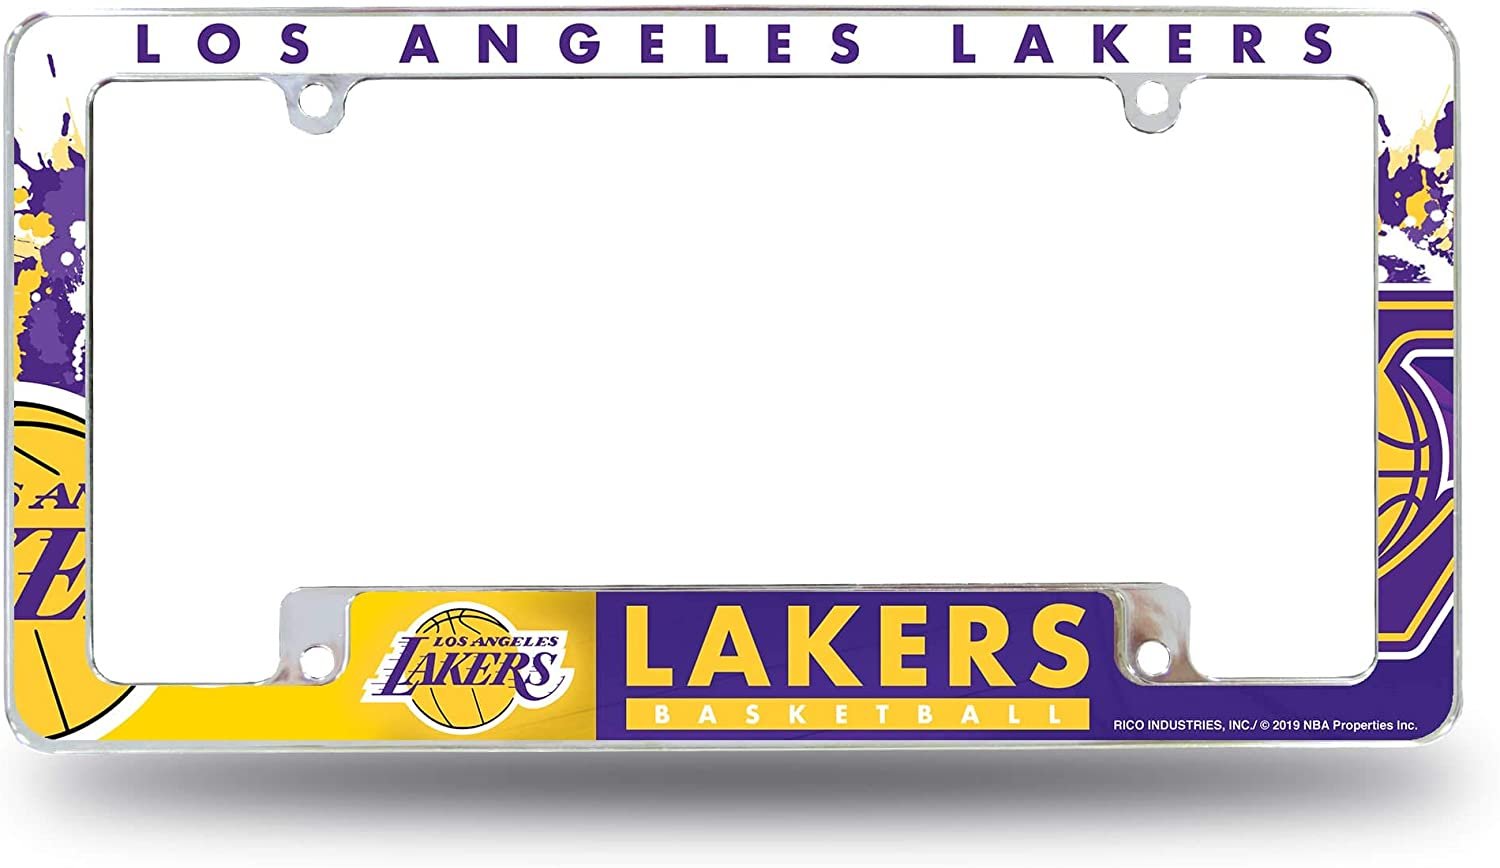 Los Angeles Lakers Metal License Plate Frame Chrome Tag Cover All Over Design